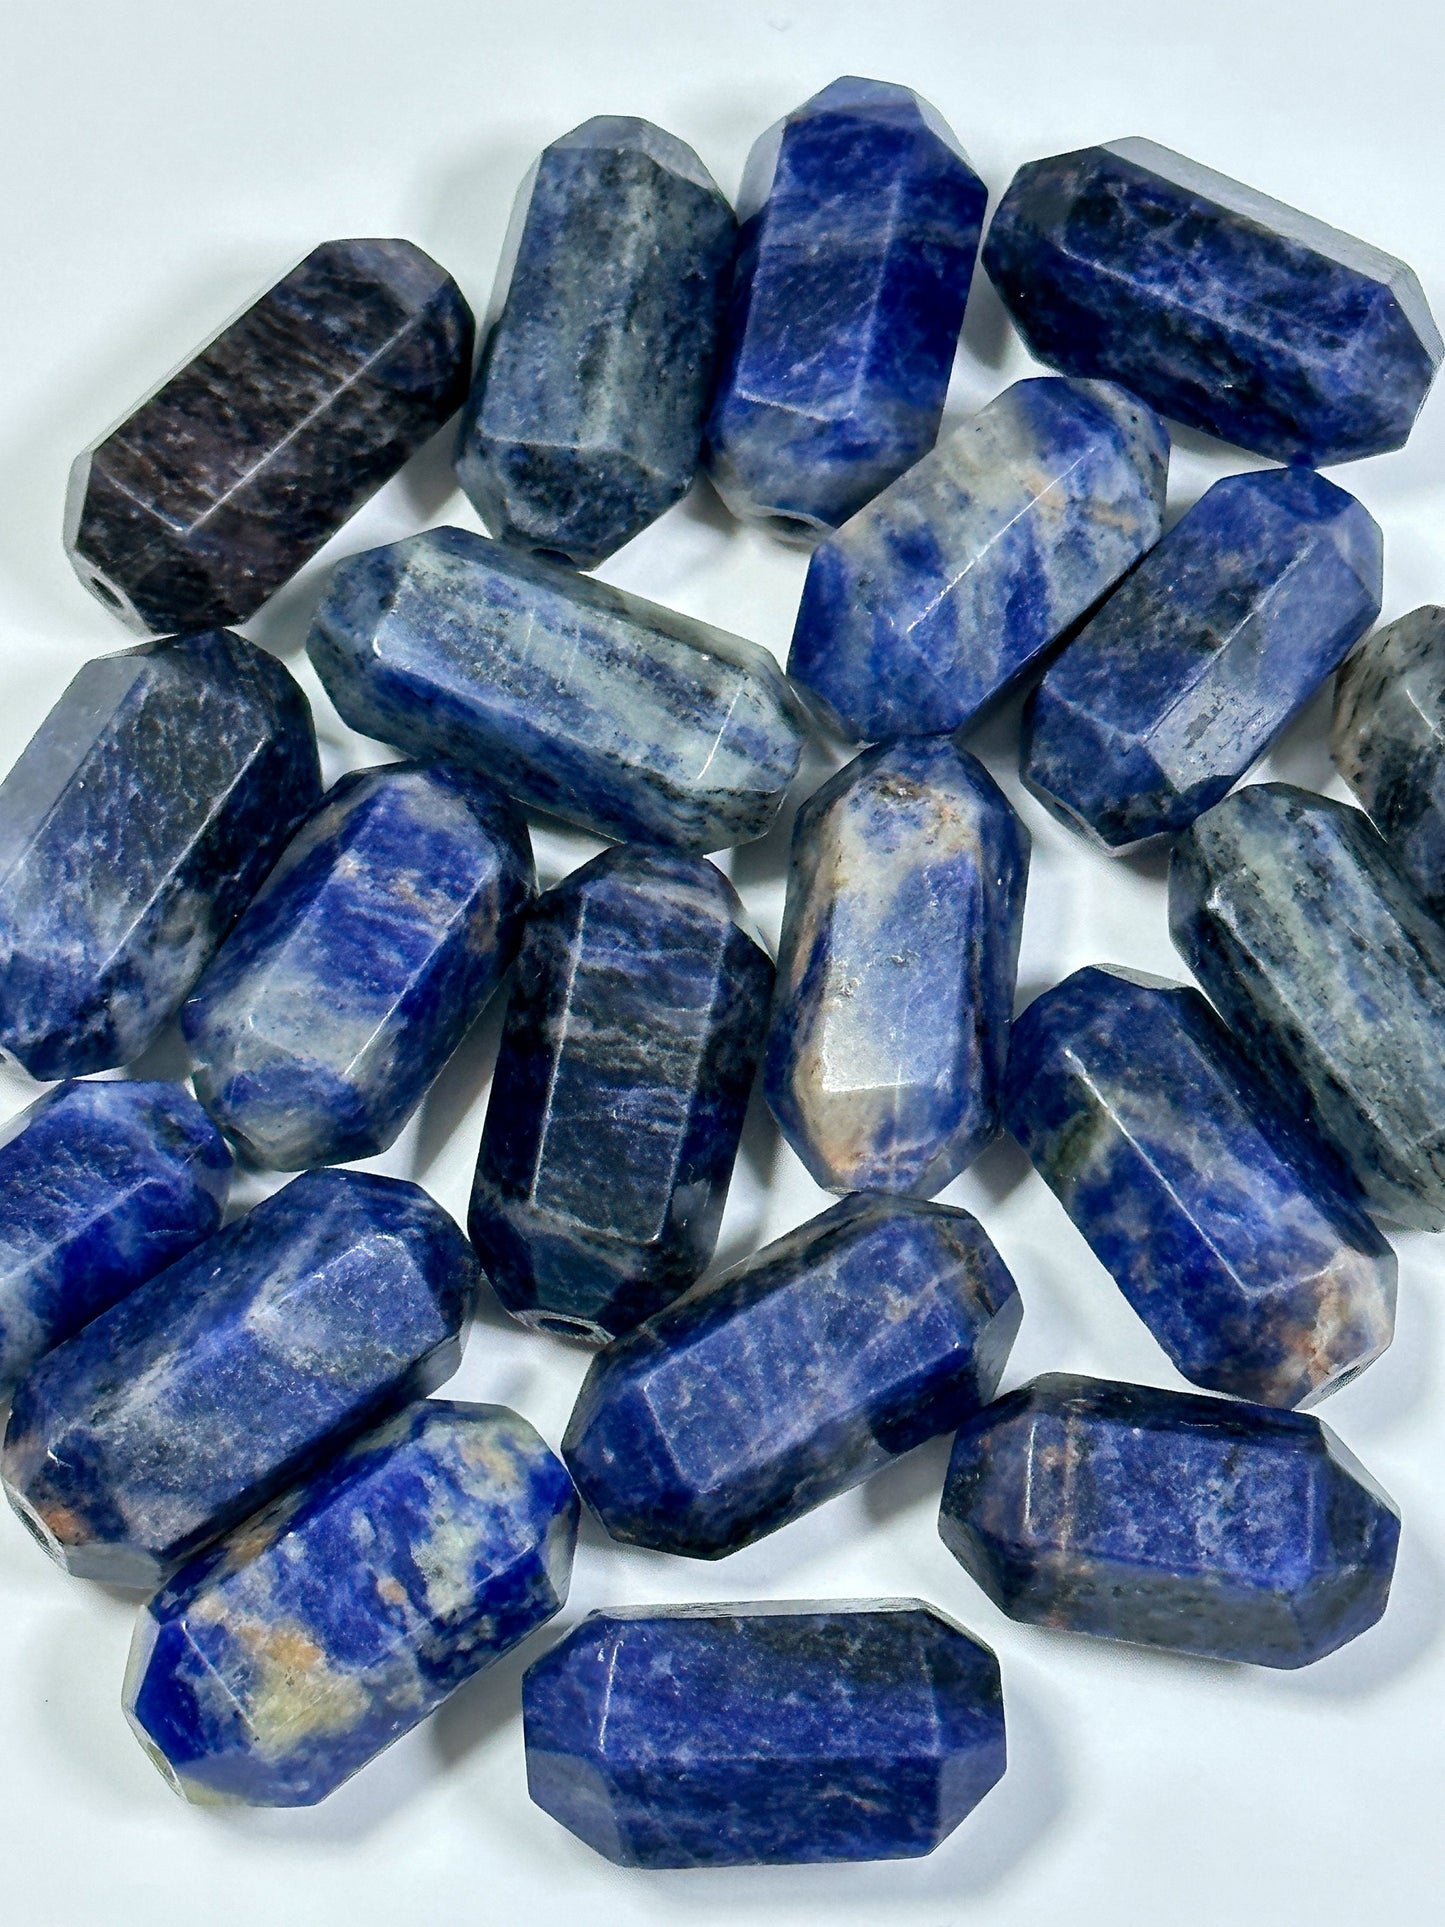 NATURAL Sodalite Gemstone Bead Faceted 26x13mm Barrel Shape Bead, Beautiful Blue Color Sodalite Gemstone Beads, Loose Sodalite Beads